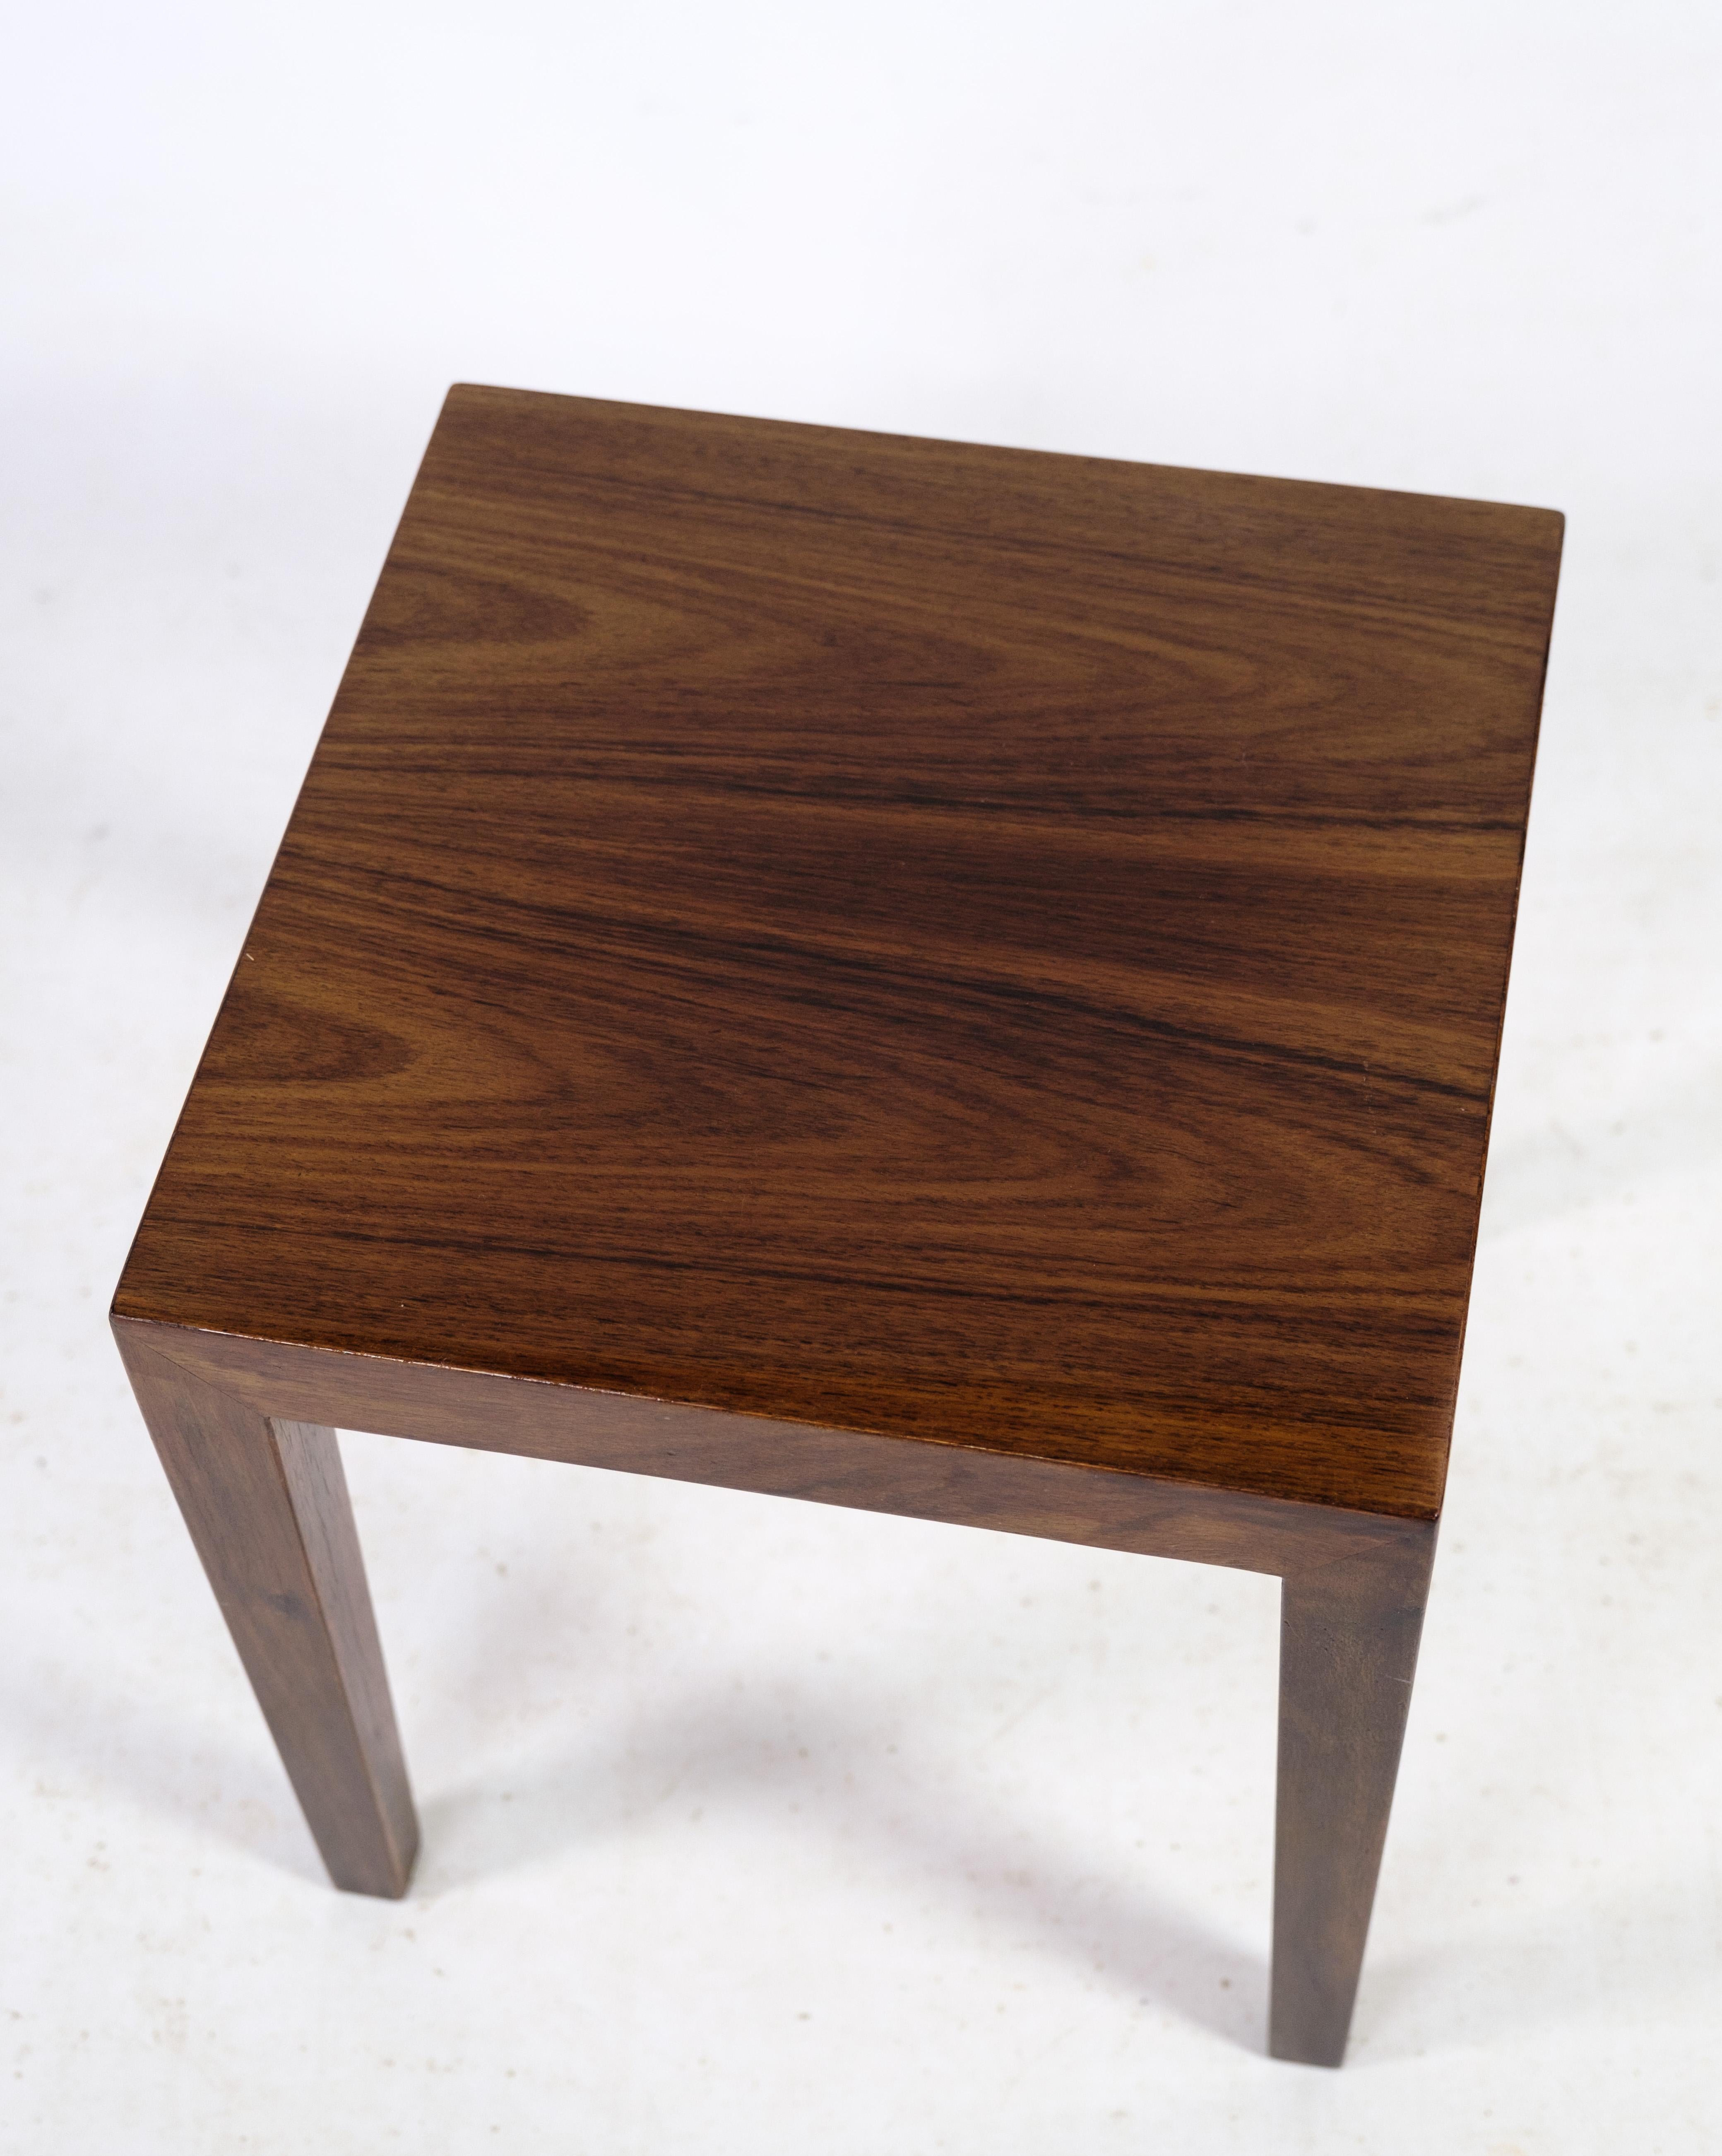 This small side table in rosewood, designed by the renowned Severin Hansen and manufactured by Haslev Møbelfabrik around the 1960s, epitomizes the elegance and craftsmanship of Danish design.

Severin Hansen's keen eye for detail is showcased in the